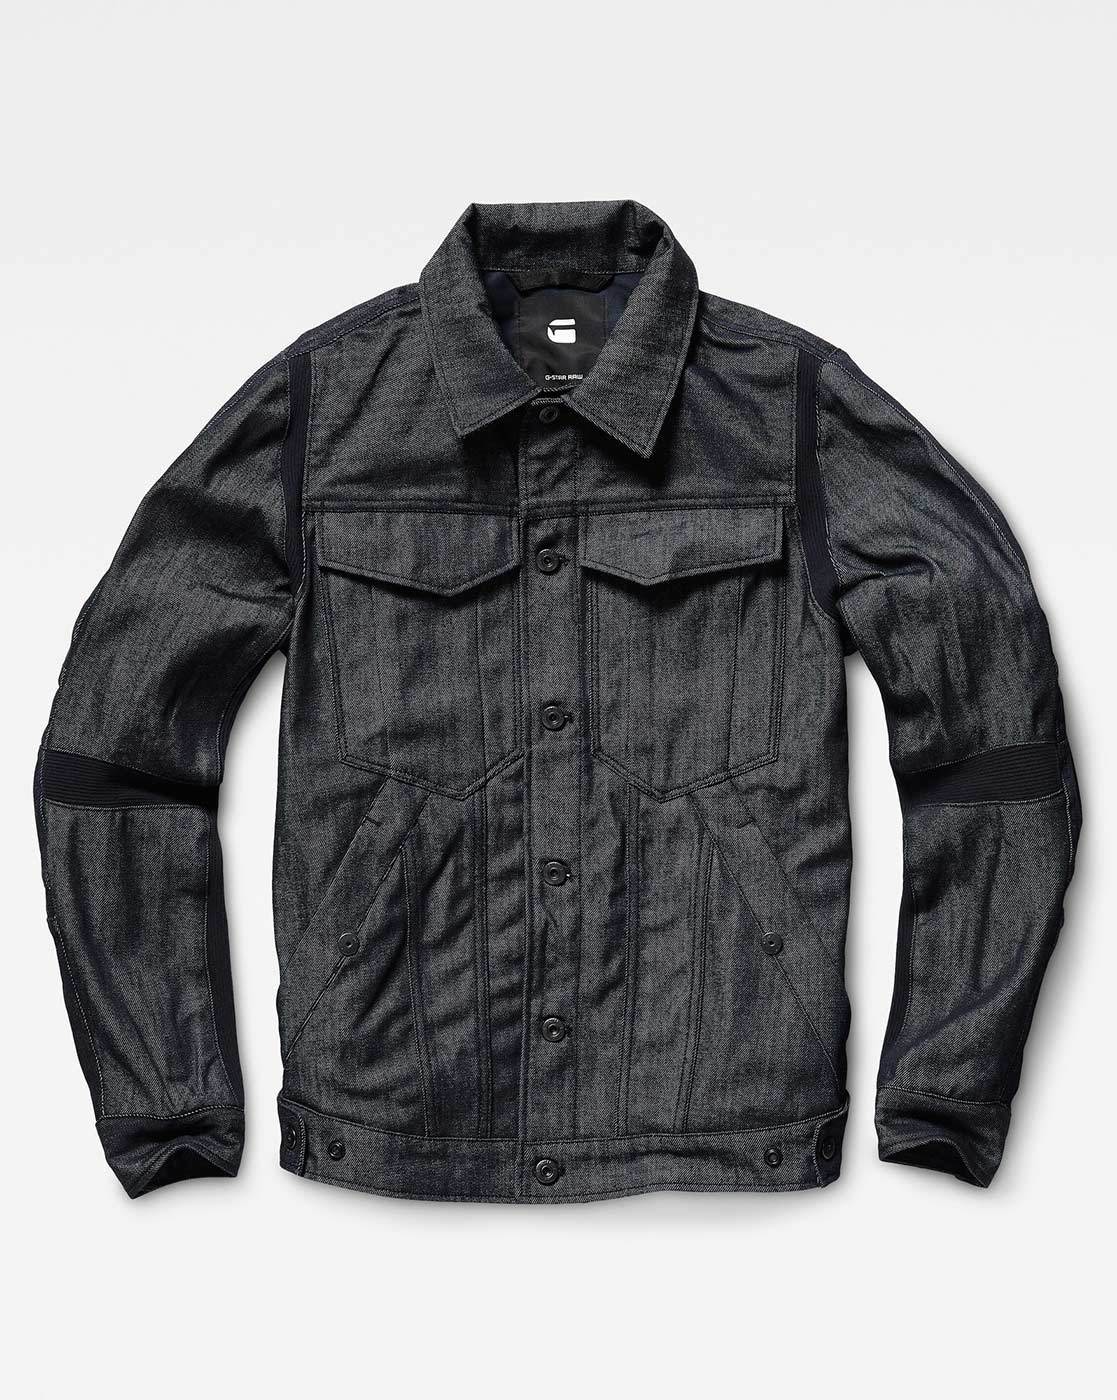 Jackets \u0026 Coats for Men by G STAR RAW 